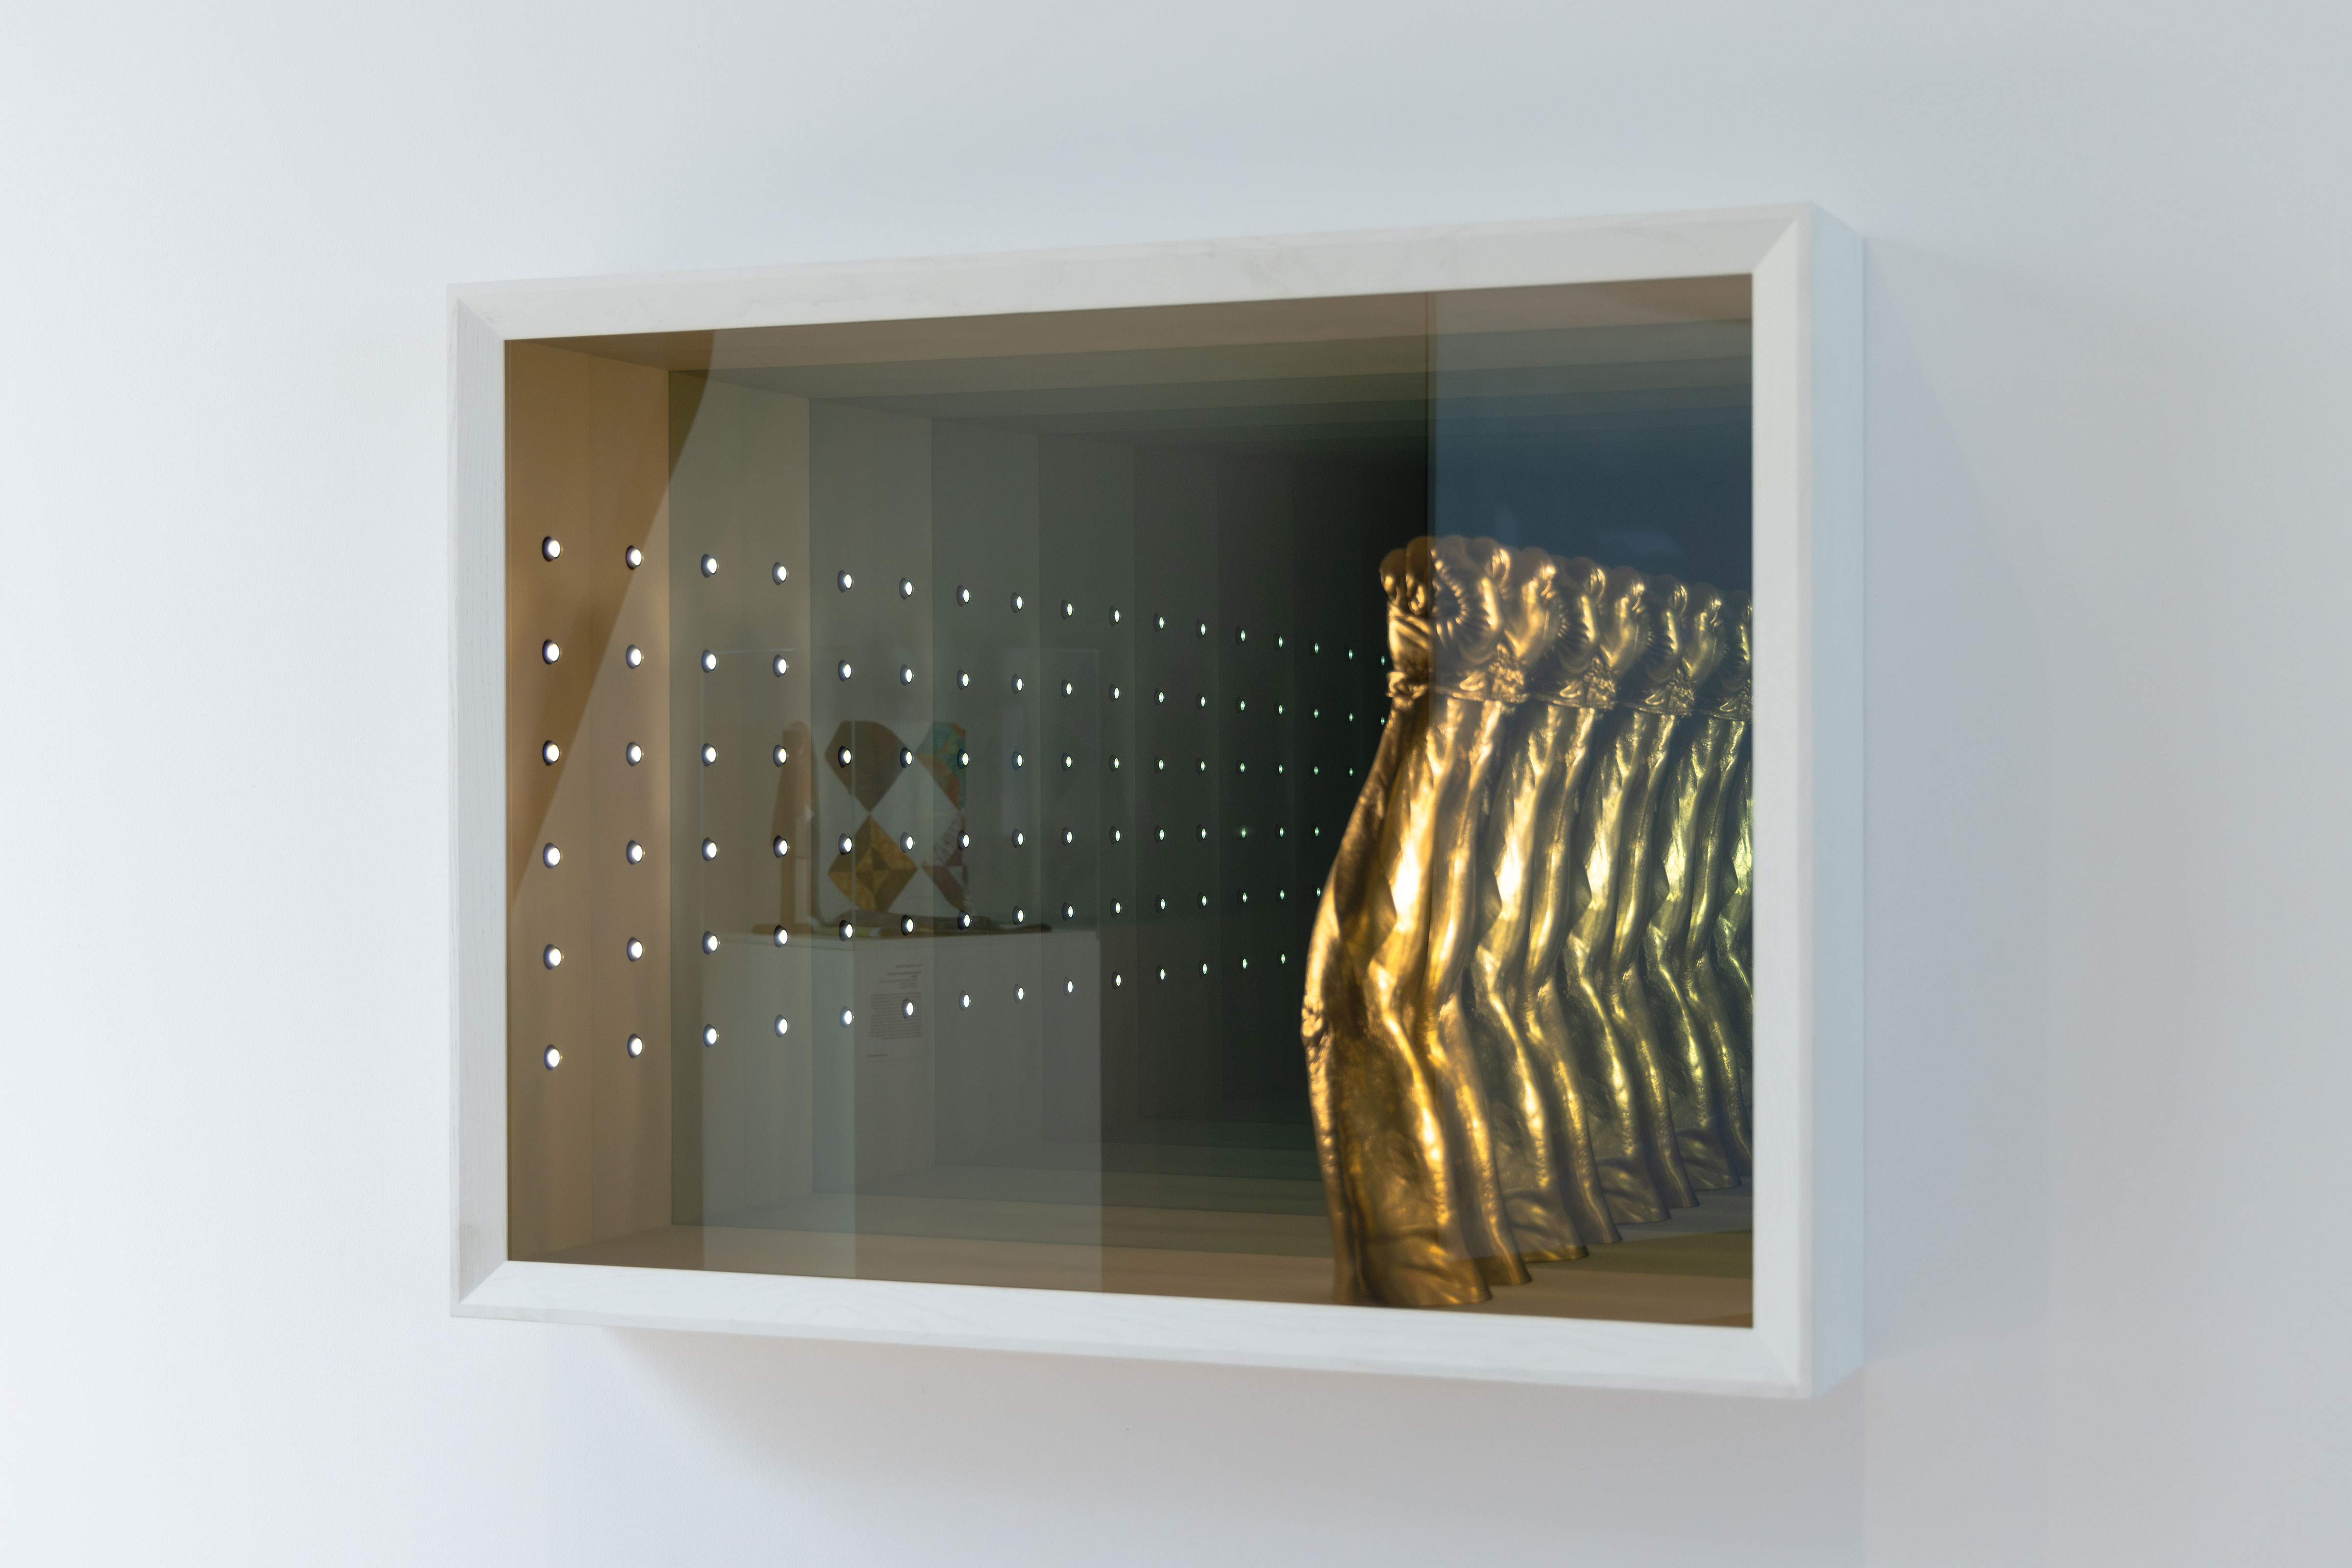 A gold cast of a fist in a frame of infinity mirrors. 